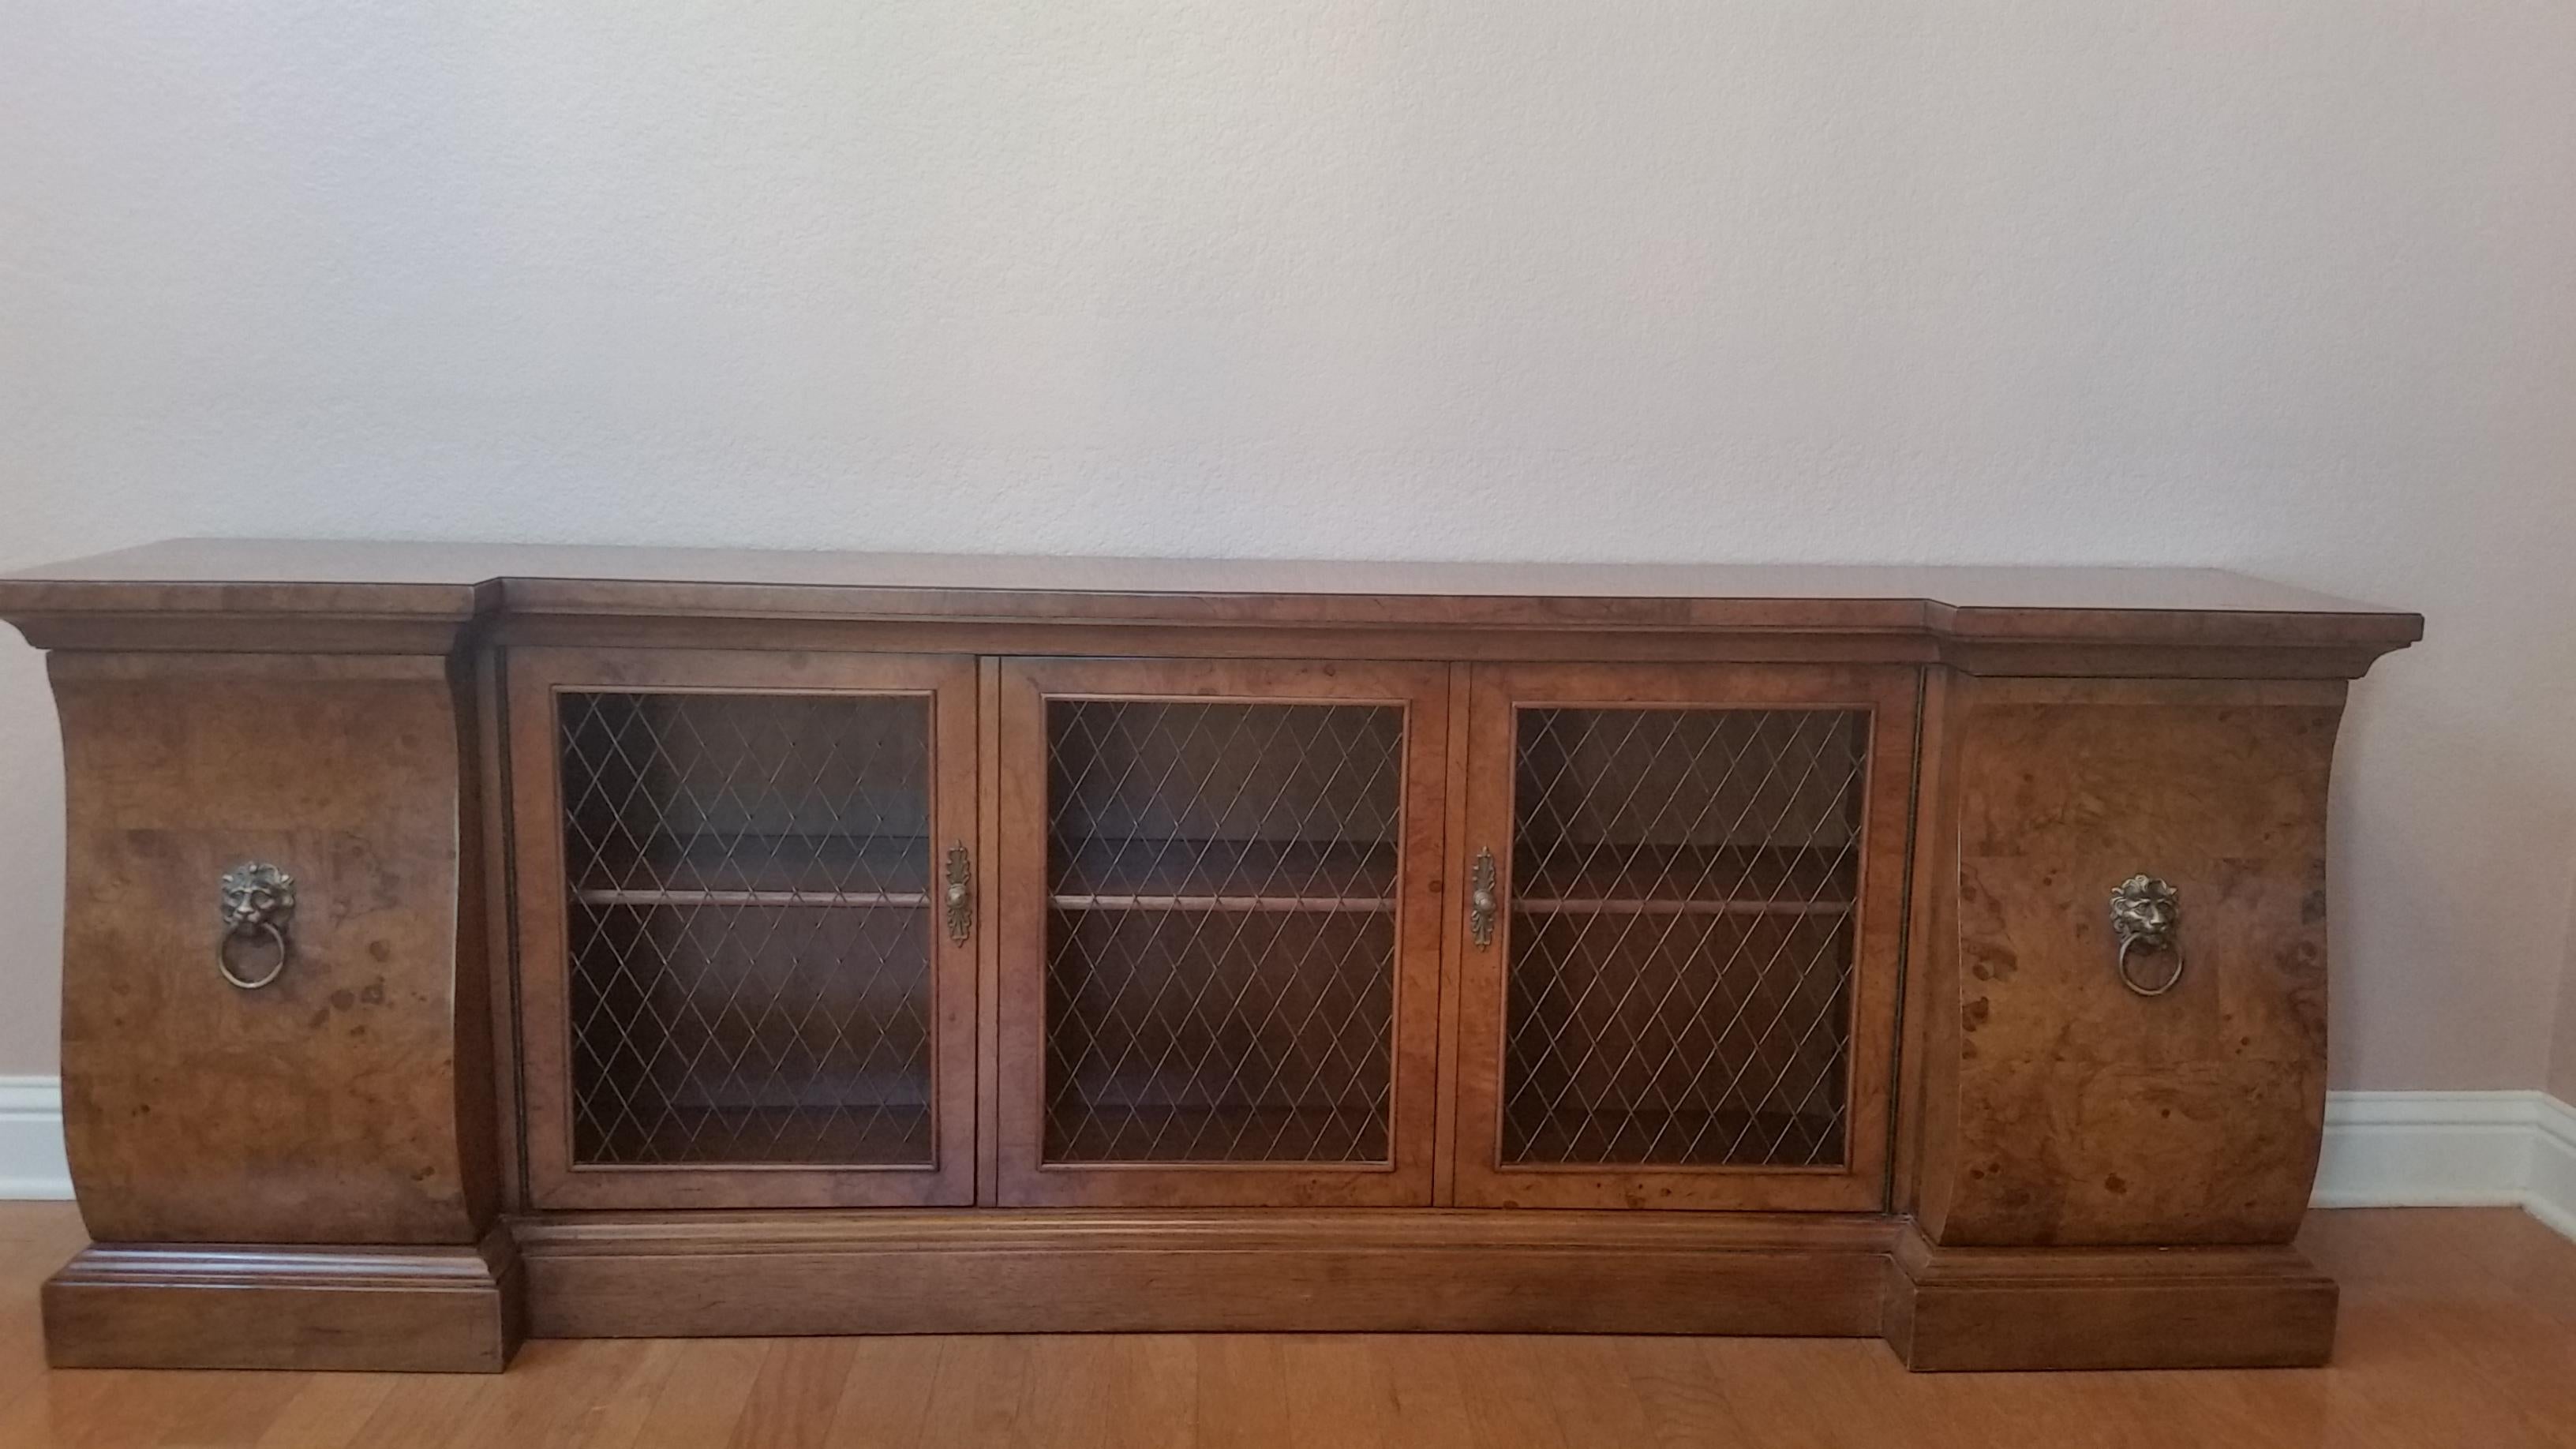 Handmade in America by the venerable Tomlinson Furniture Company, this burled walnut console/credenza/bookcase was designed originally for limited production. Today, it is a rare heirloom find. 

Overall, the piece has a warm rich luster and